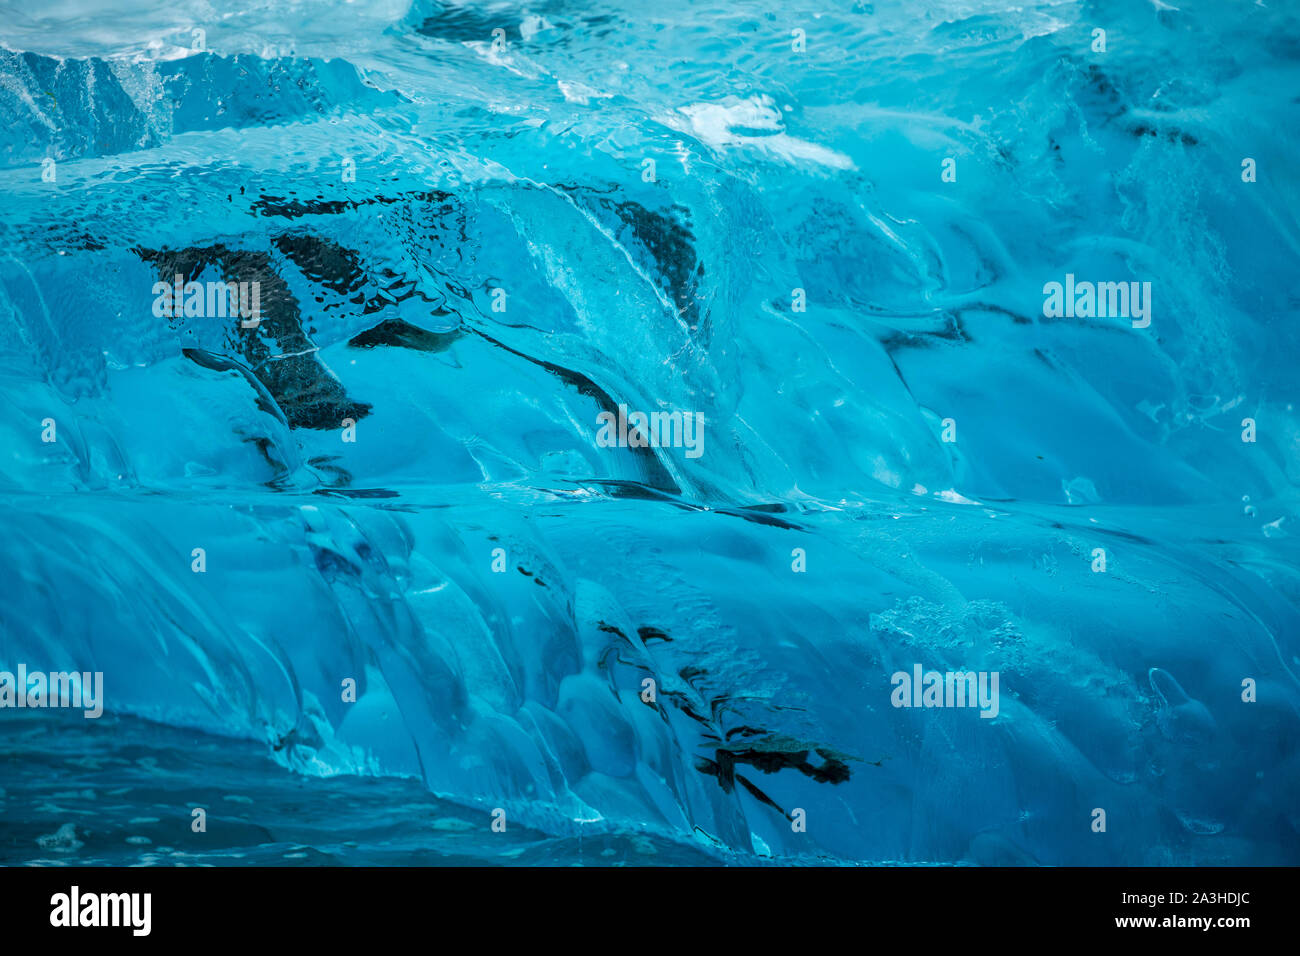 USA, Alaska, Close-up view of deep blue  iceberg floating near calving face of LeConte Glacier east of Petersburg Stock Photo